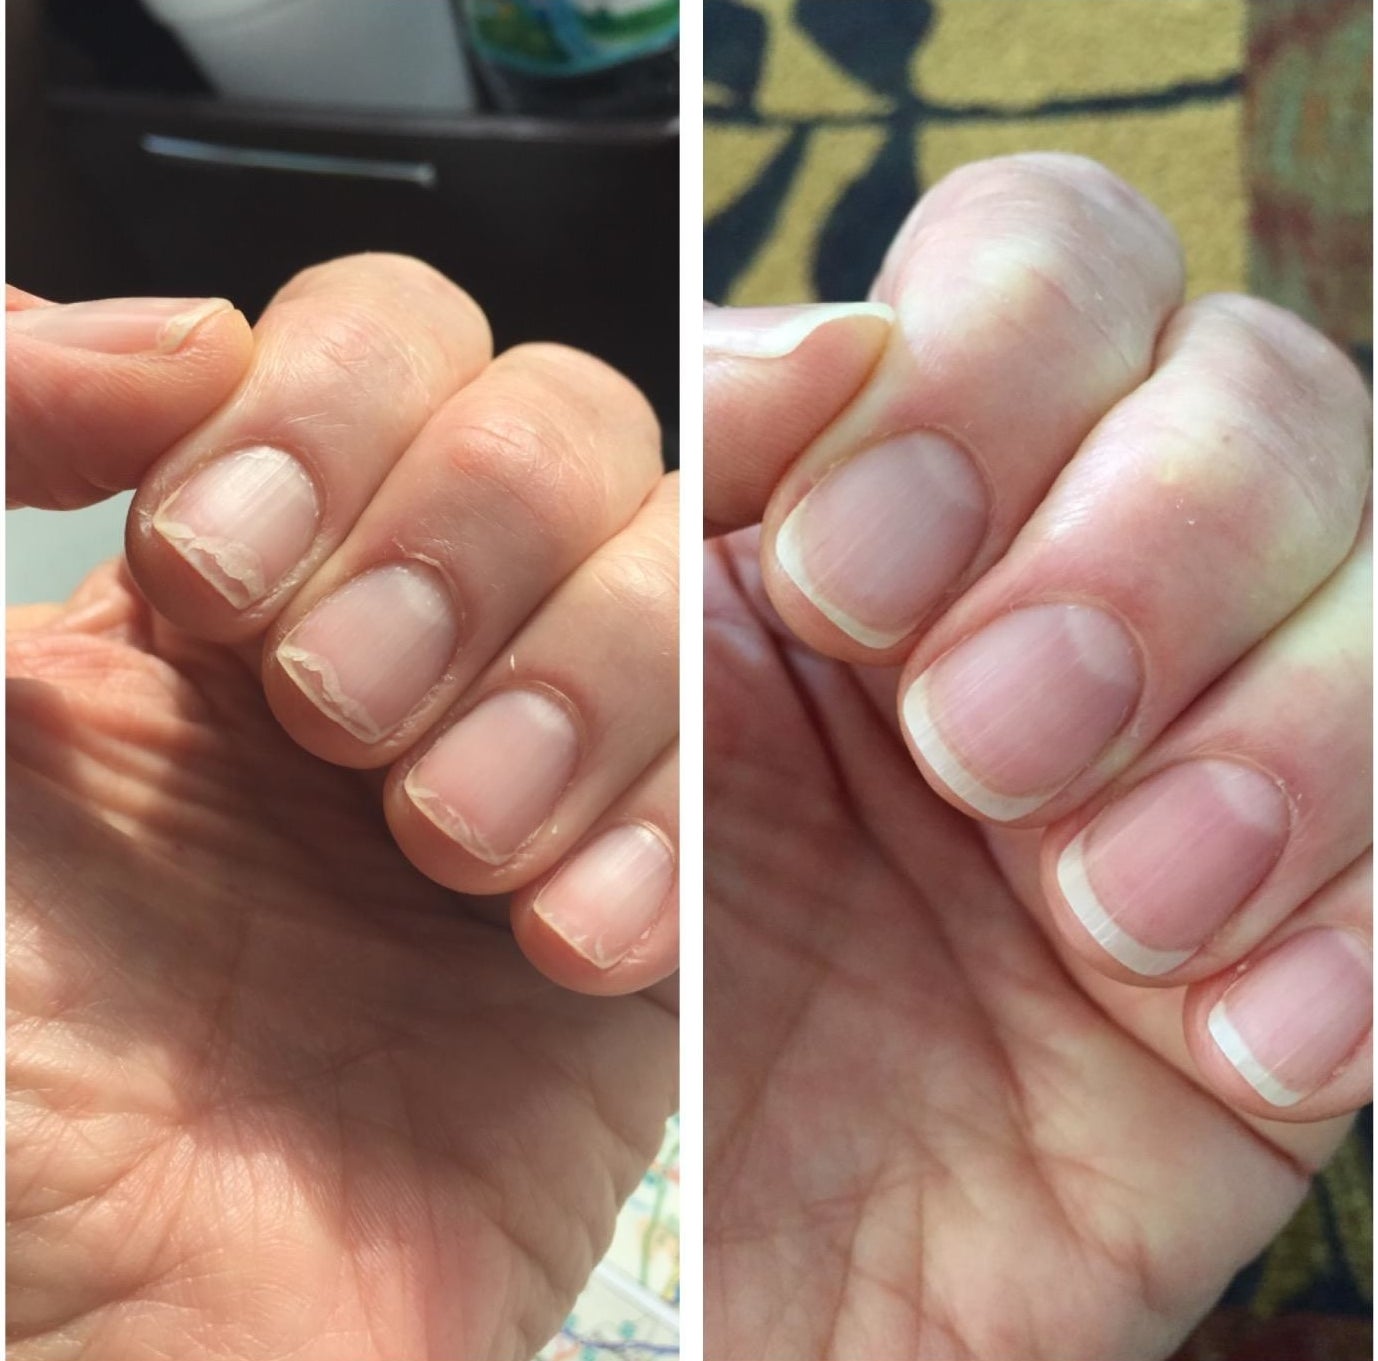 A before image of a reviewer's brittle nails and an after image of them much heaithier